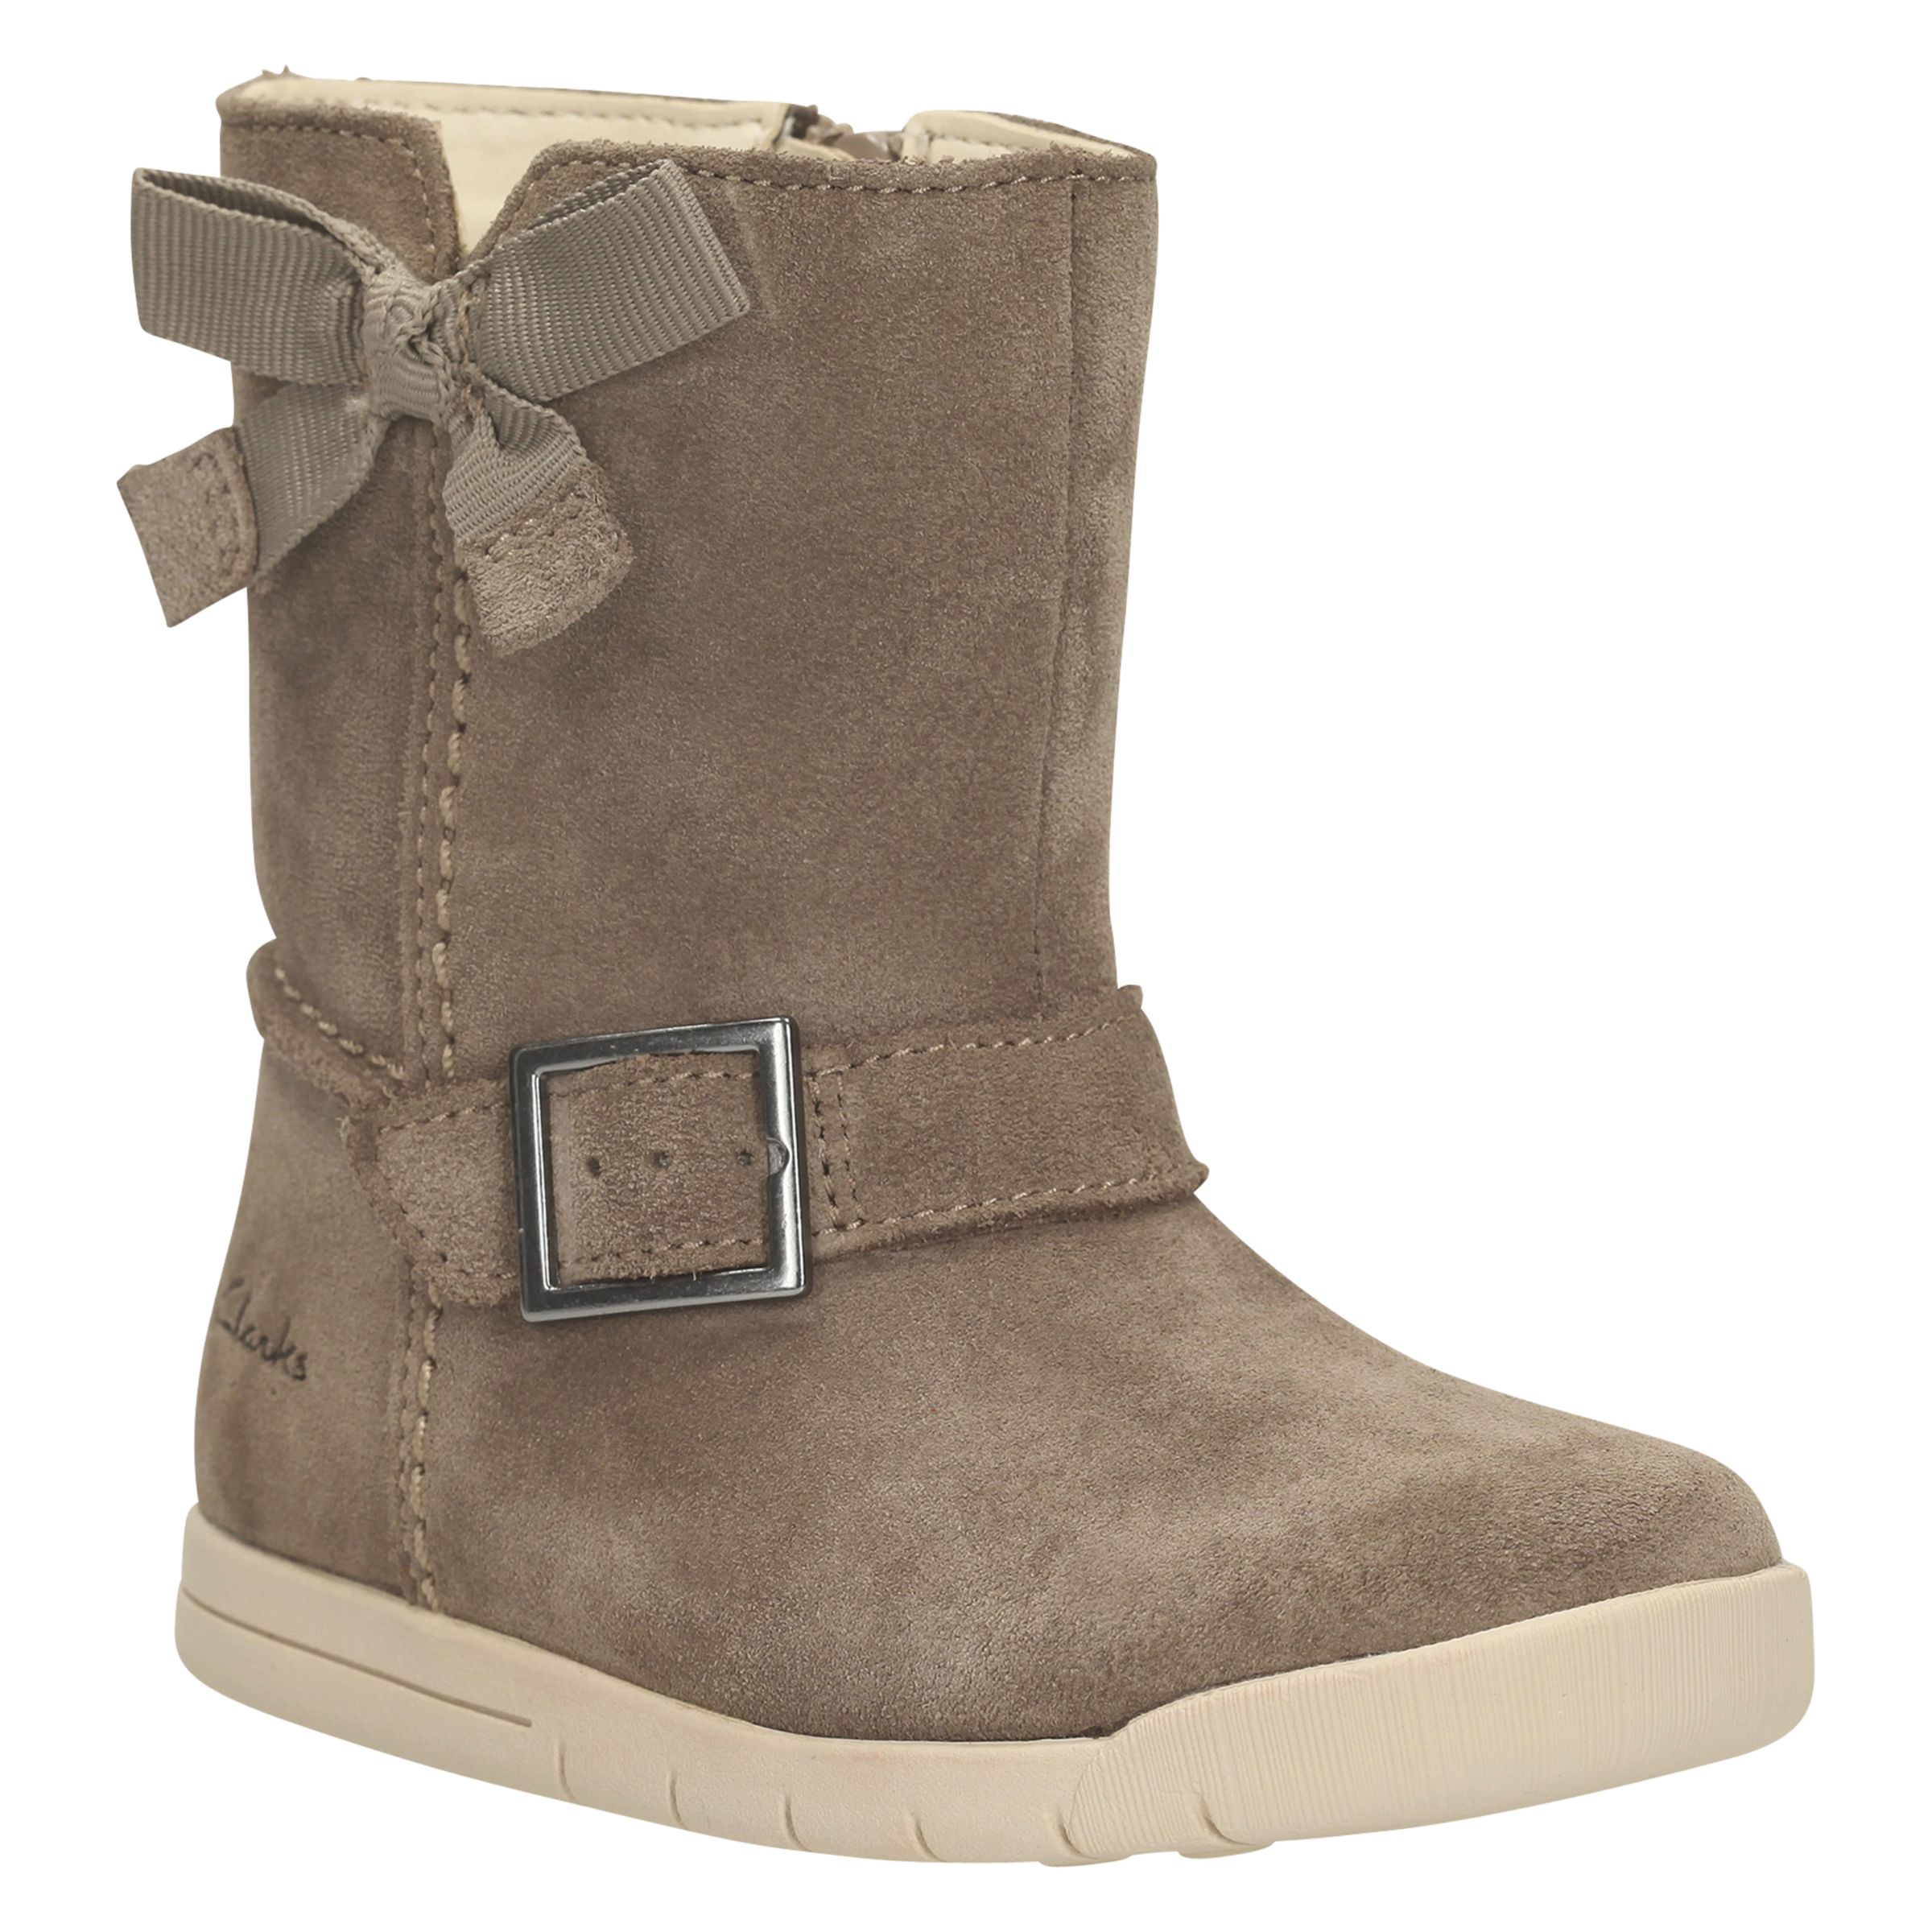 clarks childrens boots